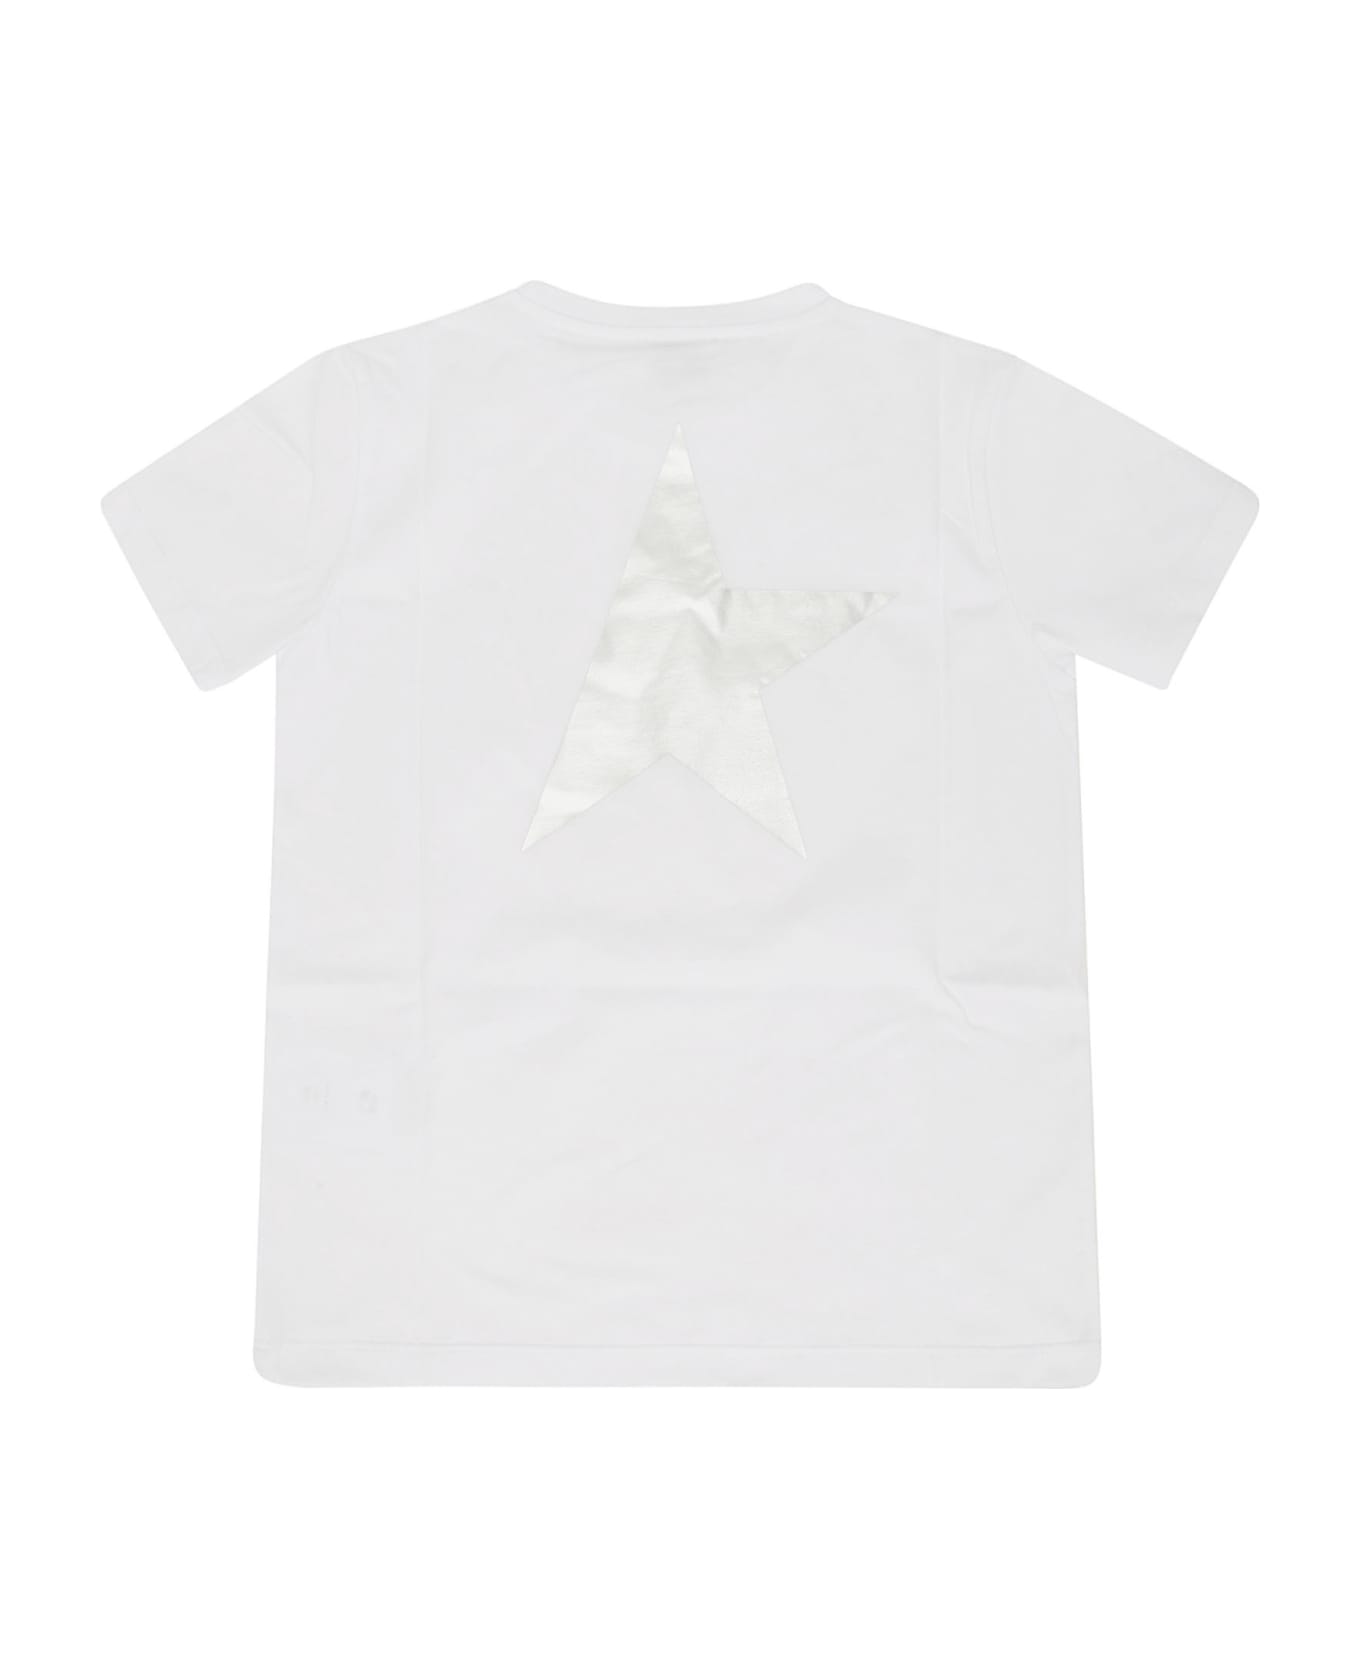 Golden Goose Star/ Boy's T-shirt S/s Logo/ Big Star Printed - WHITE/ SILVER Tシャツ＆ポロシャツ